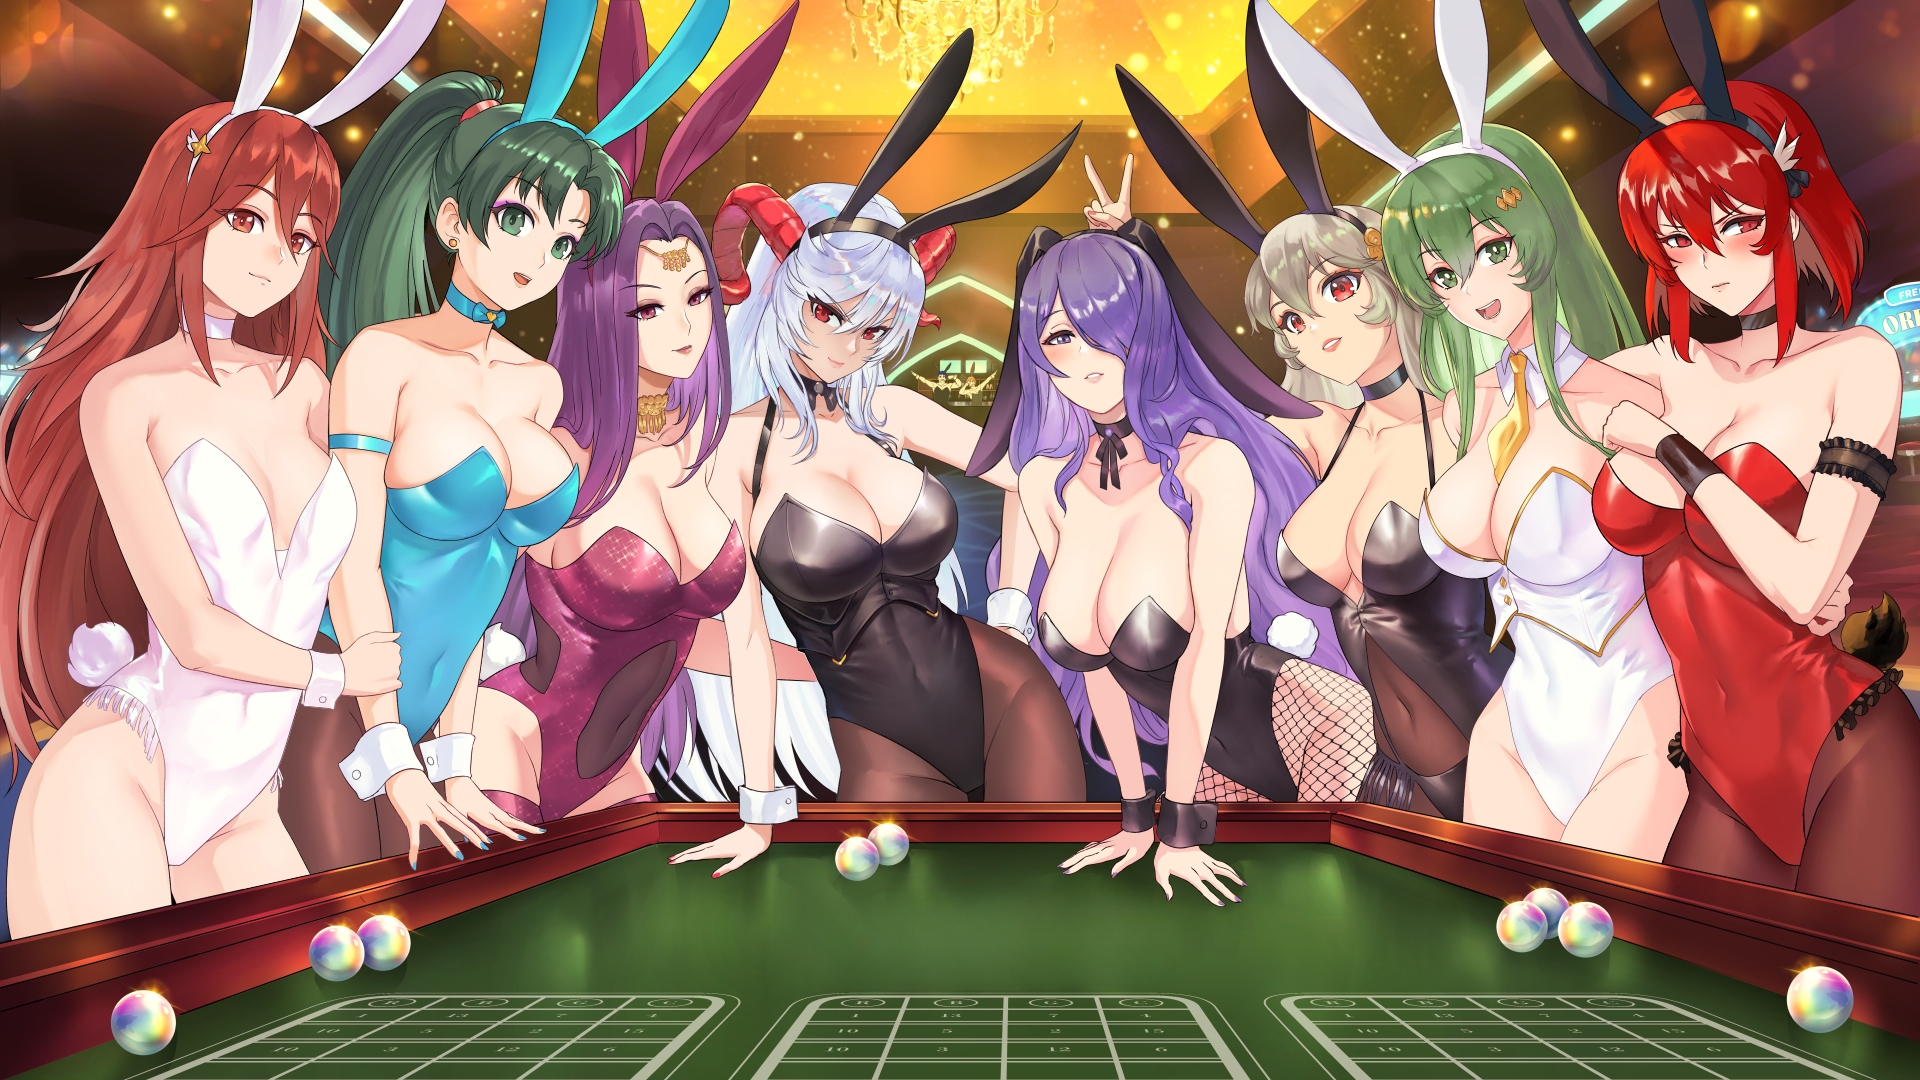 Anime 1920x1080 video games video game girls long hair Nintendo bangs anime girls Fire Emblem animal ears bunny girl bunny suit leotard Camilla (Fire Emblem) Cordelia (Fire Emblem) Lyn (Fire Emblem) Corrin Erinys (Fire Emblem) Freyja (Fire Emblem) Minerva (Fire Emblem) Sonya (Fire Emblem) Fire Emblem Gaiden Fire Emblem Fates Fire Emblem Awakening Fire Emblem The Blazing Blade redhead red eyes green hair green eyes choker purple hair purple eyes white hair pantyhose brown pantyhose blunt bangs sidelocks black leotard white leotard red leotard blue leotard bunny tail sleeveless sleeveless cuffs cleavage big boobs hair clip hair ornament bracelets fishnet fishnets fishnet pantyhose casino Candelabra velvet roulette horns thighs jewelry necklace shirtless collar earring belly button tight clothing shoulder length hair